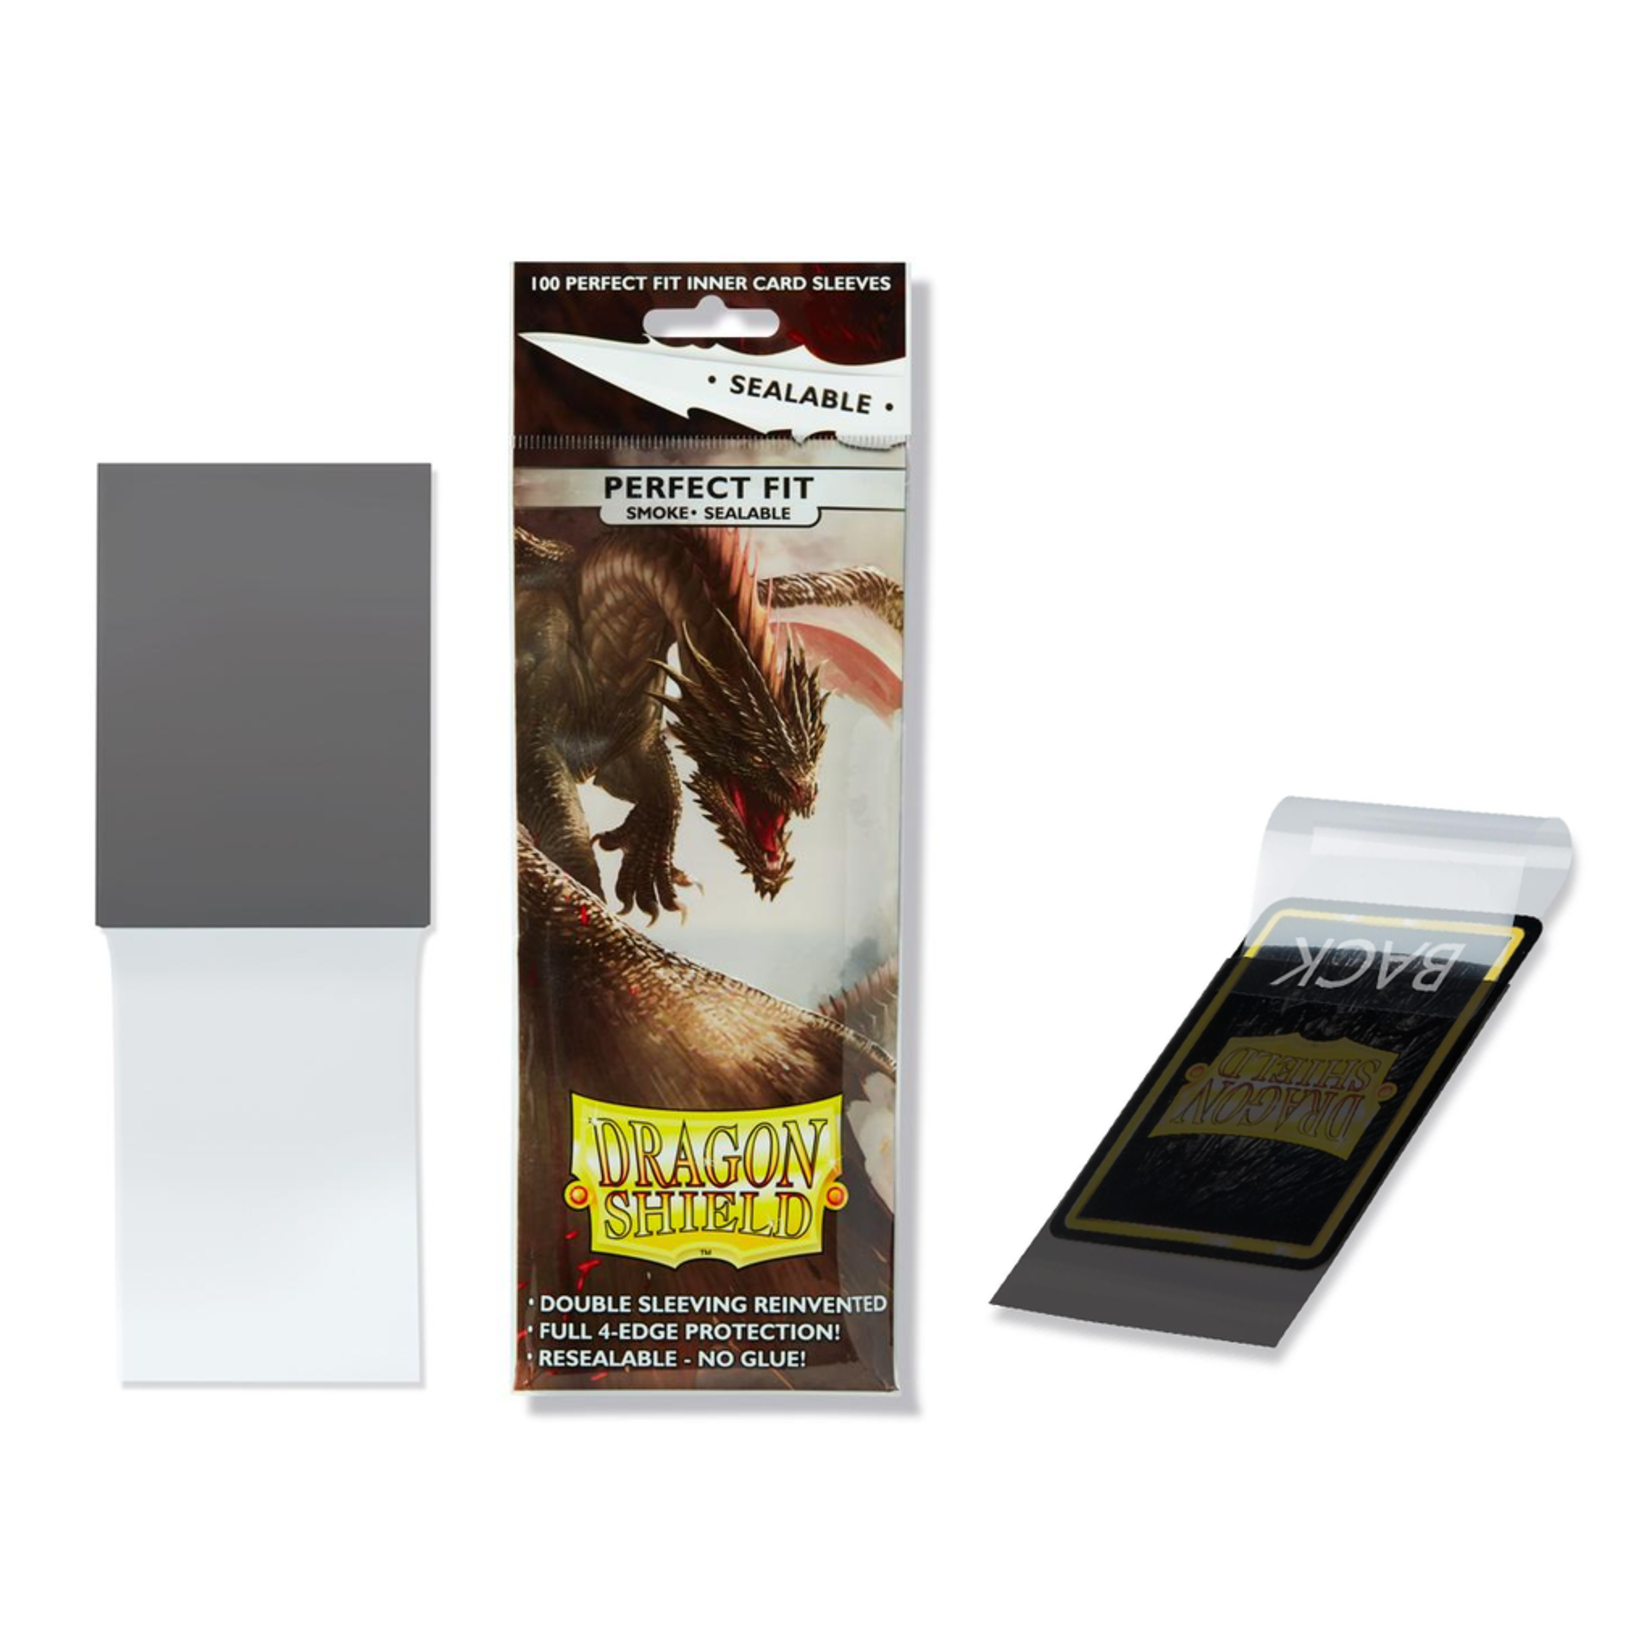 Dragon Shield: Perfect Fit Cards Sleeves - Side-load Smoke (100